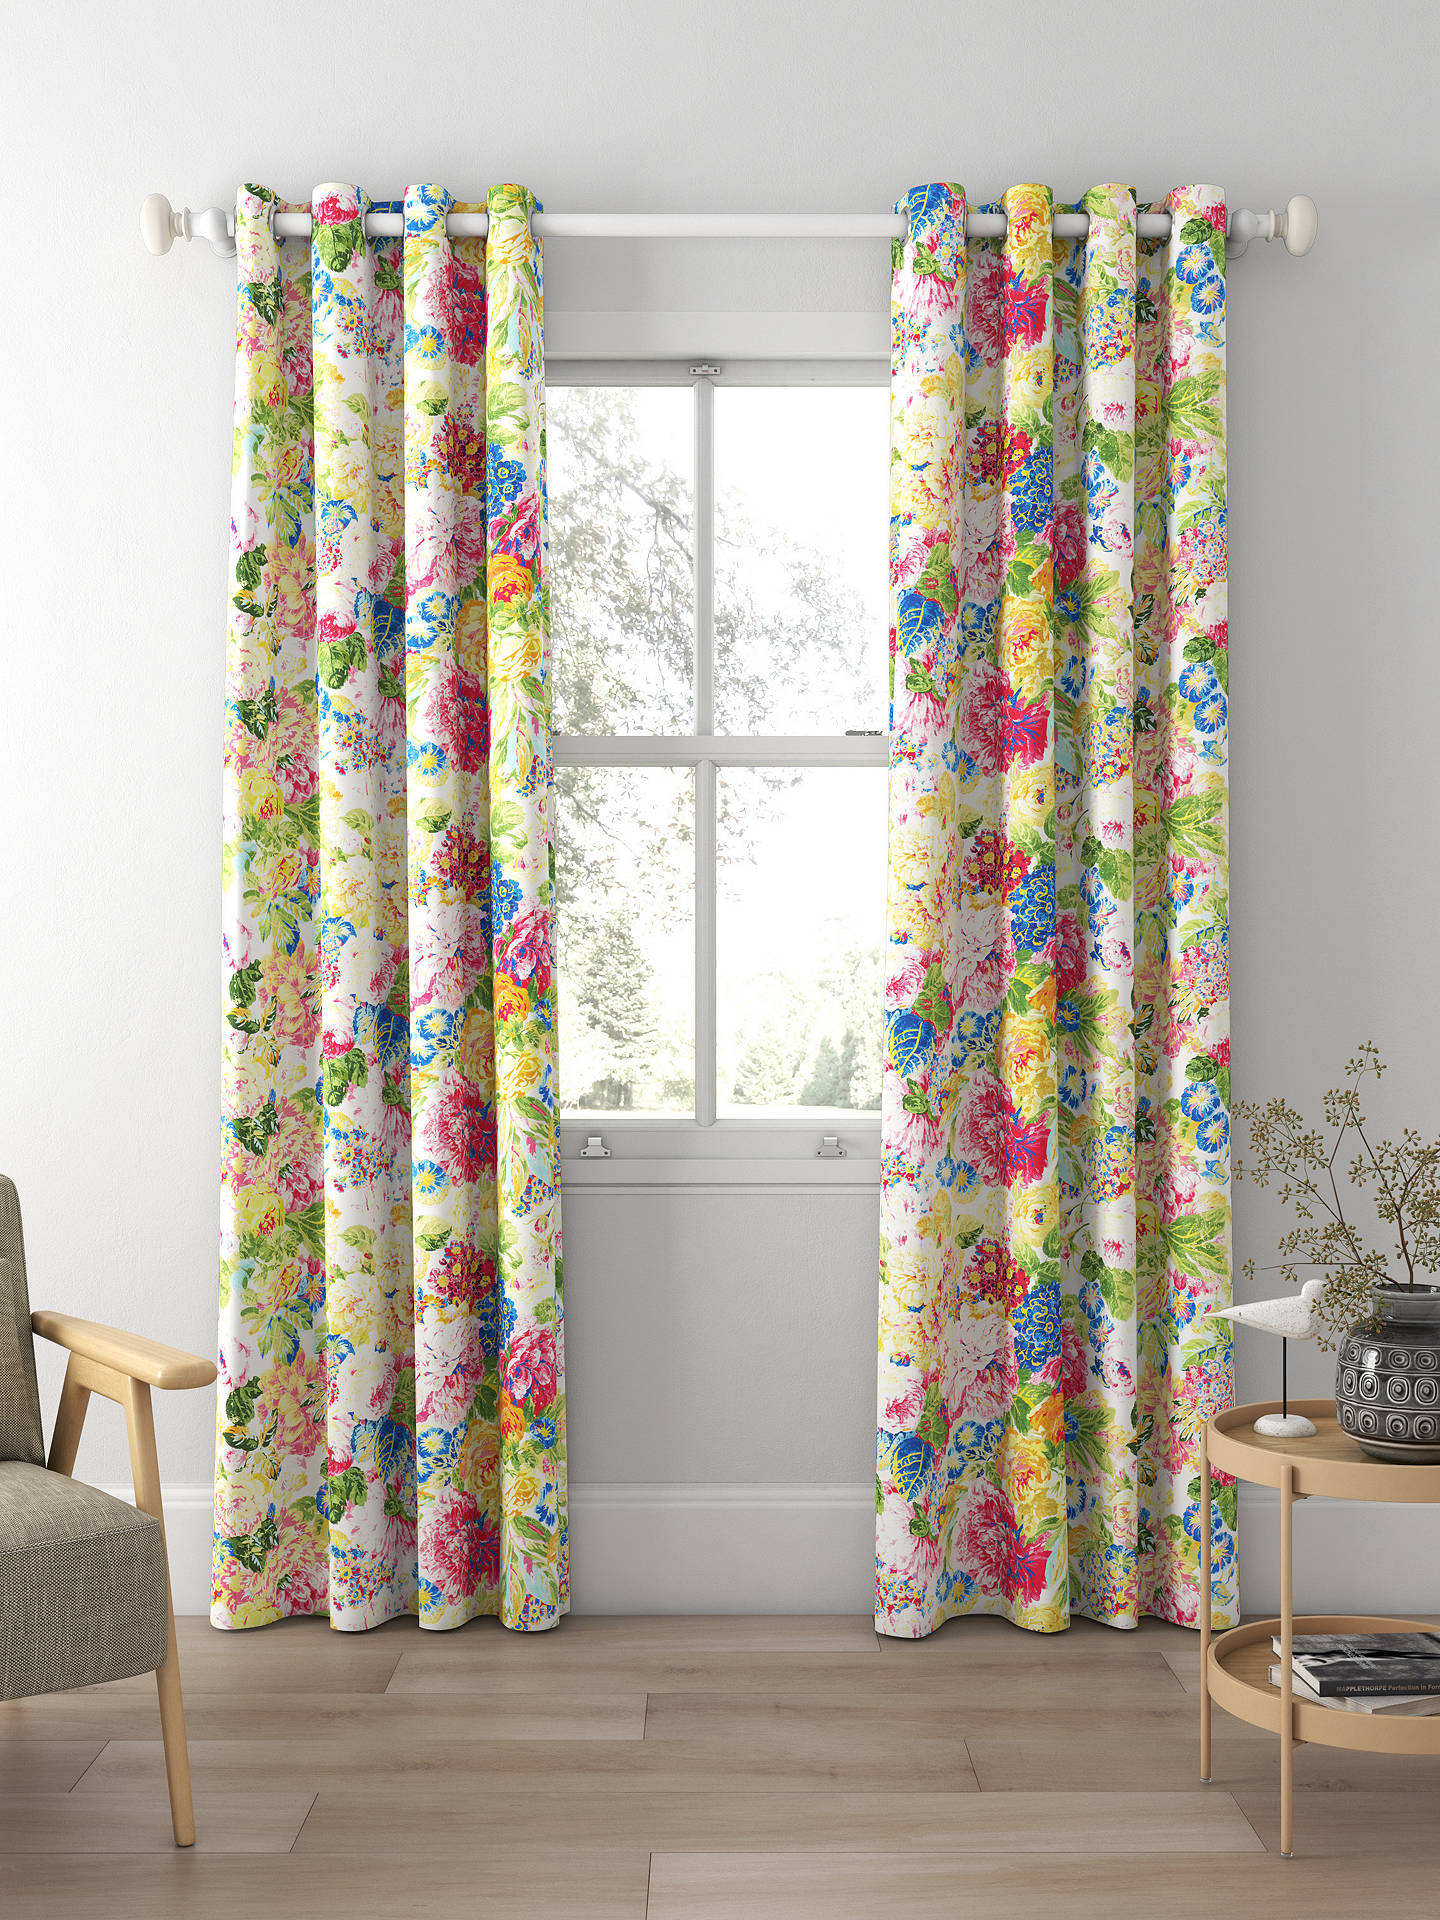 Sanderson Very Rose and Peony Made to Measure Curtains, Multi